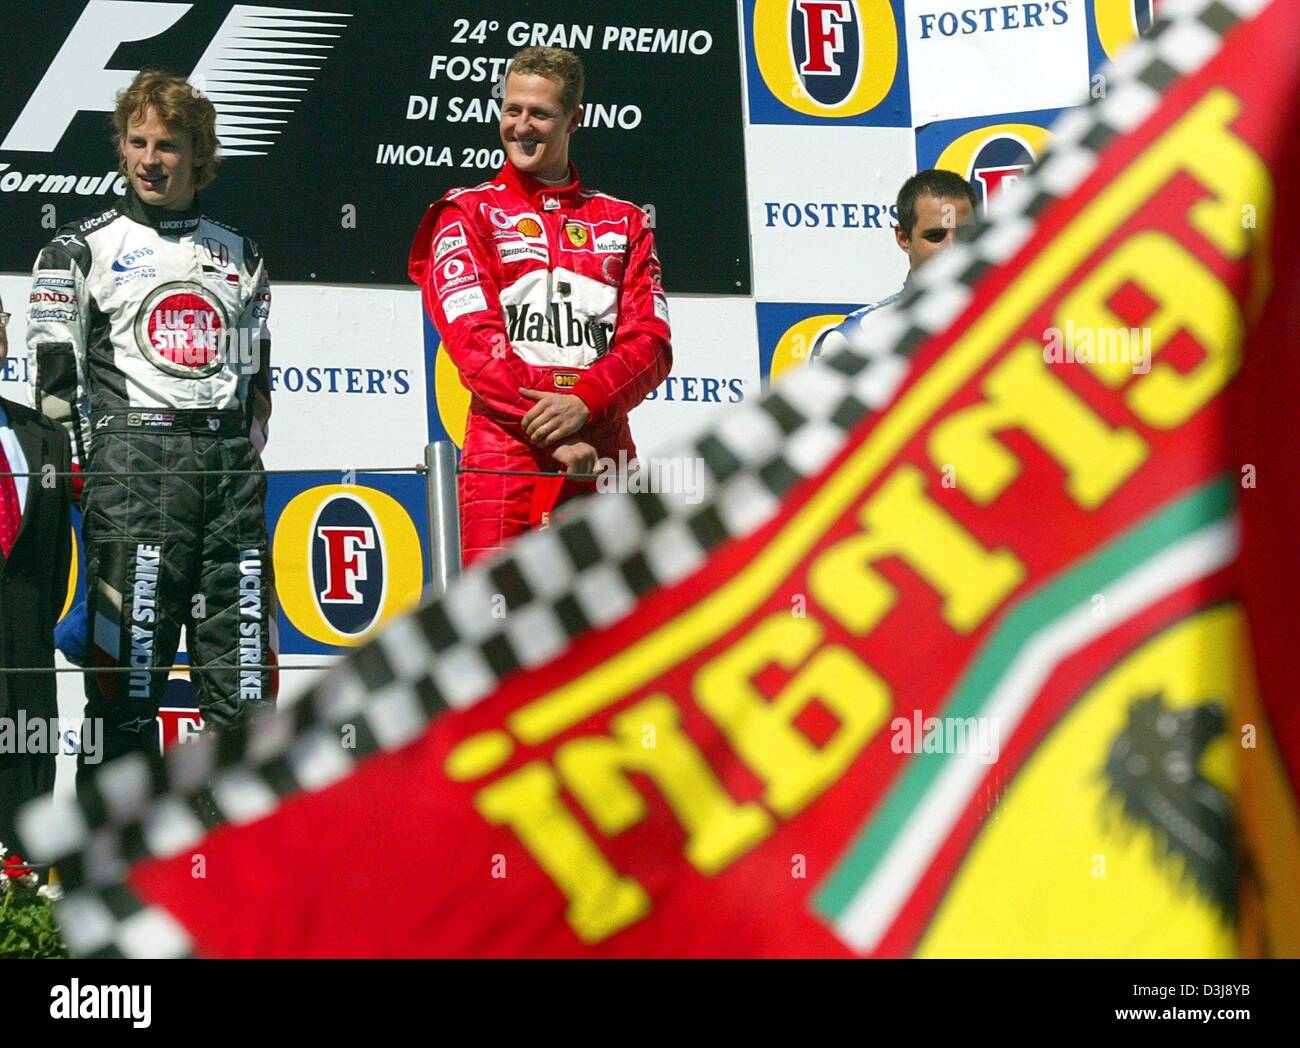 (dpa) - German formula one pilot and world champion Michael Schumacher (Ferrari) smiles as he stands between British formula one pilot Jenson Button (L) (BAR Honda) and Colombian pilot Juan Pablo Montoya (R) (BMW Williams), covered by a Ferrari flag, on the podium after the San Marino grand prix in Imola, Italy, 25 April 2004. Schumacher won the race ahead of Button and Colombian f Stock Photo